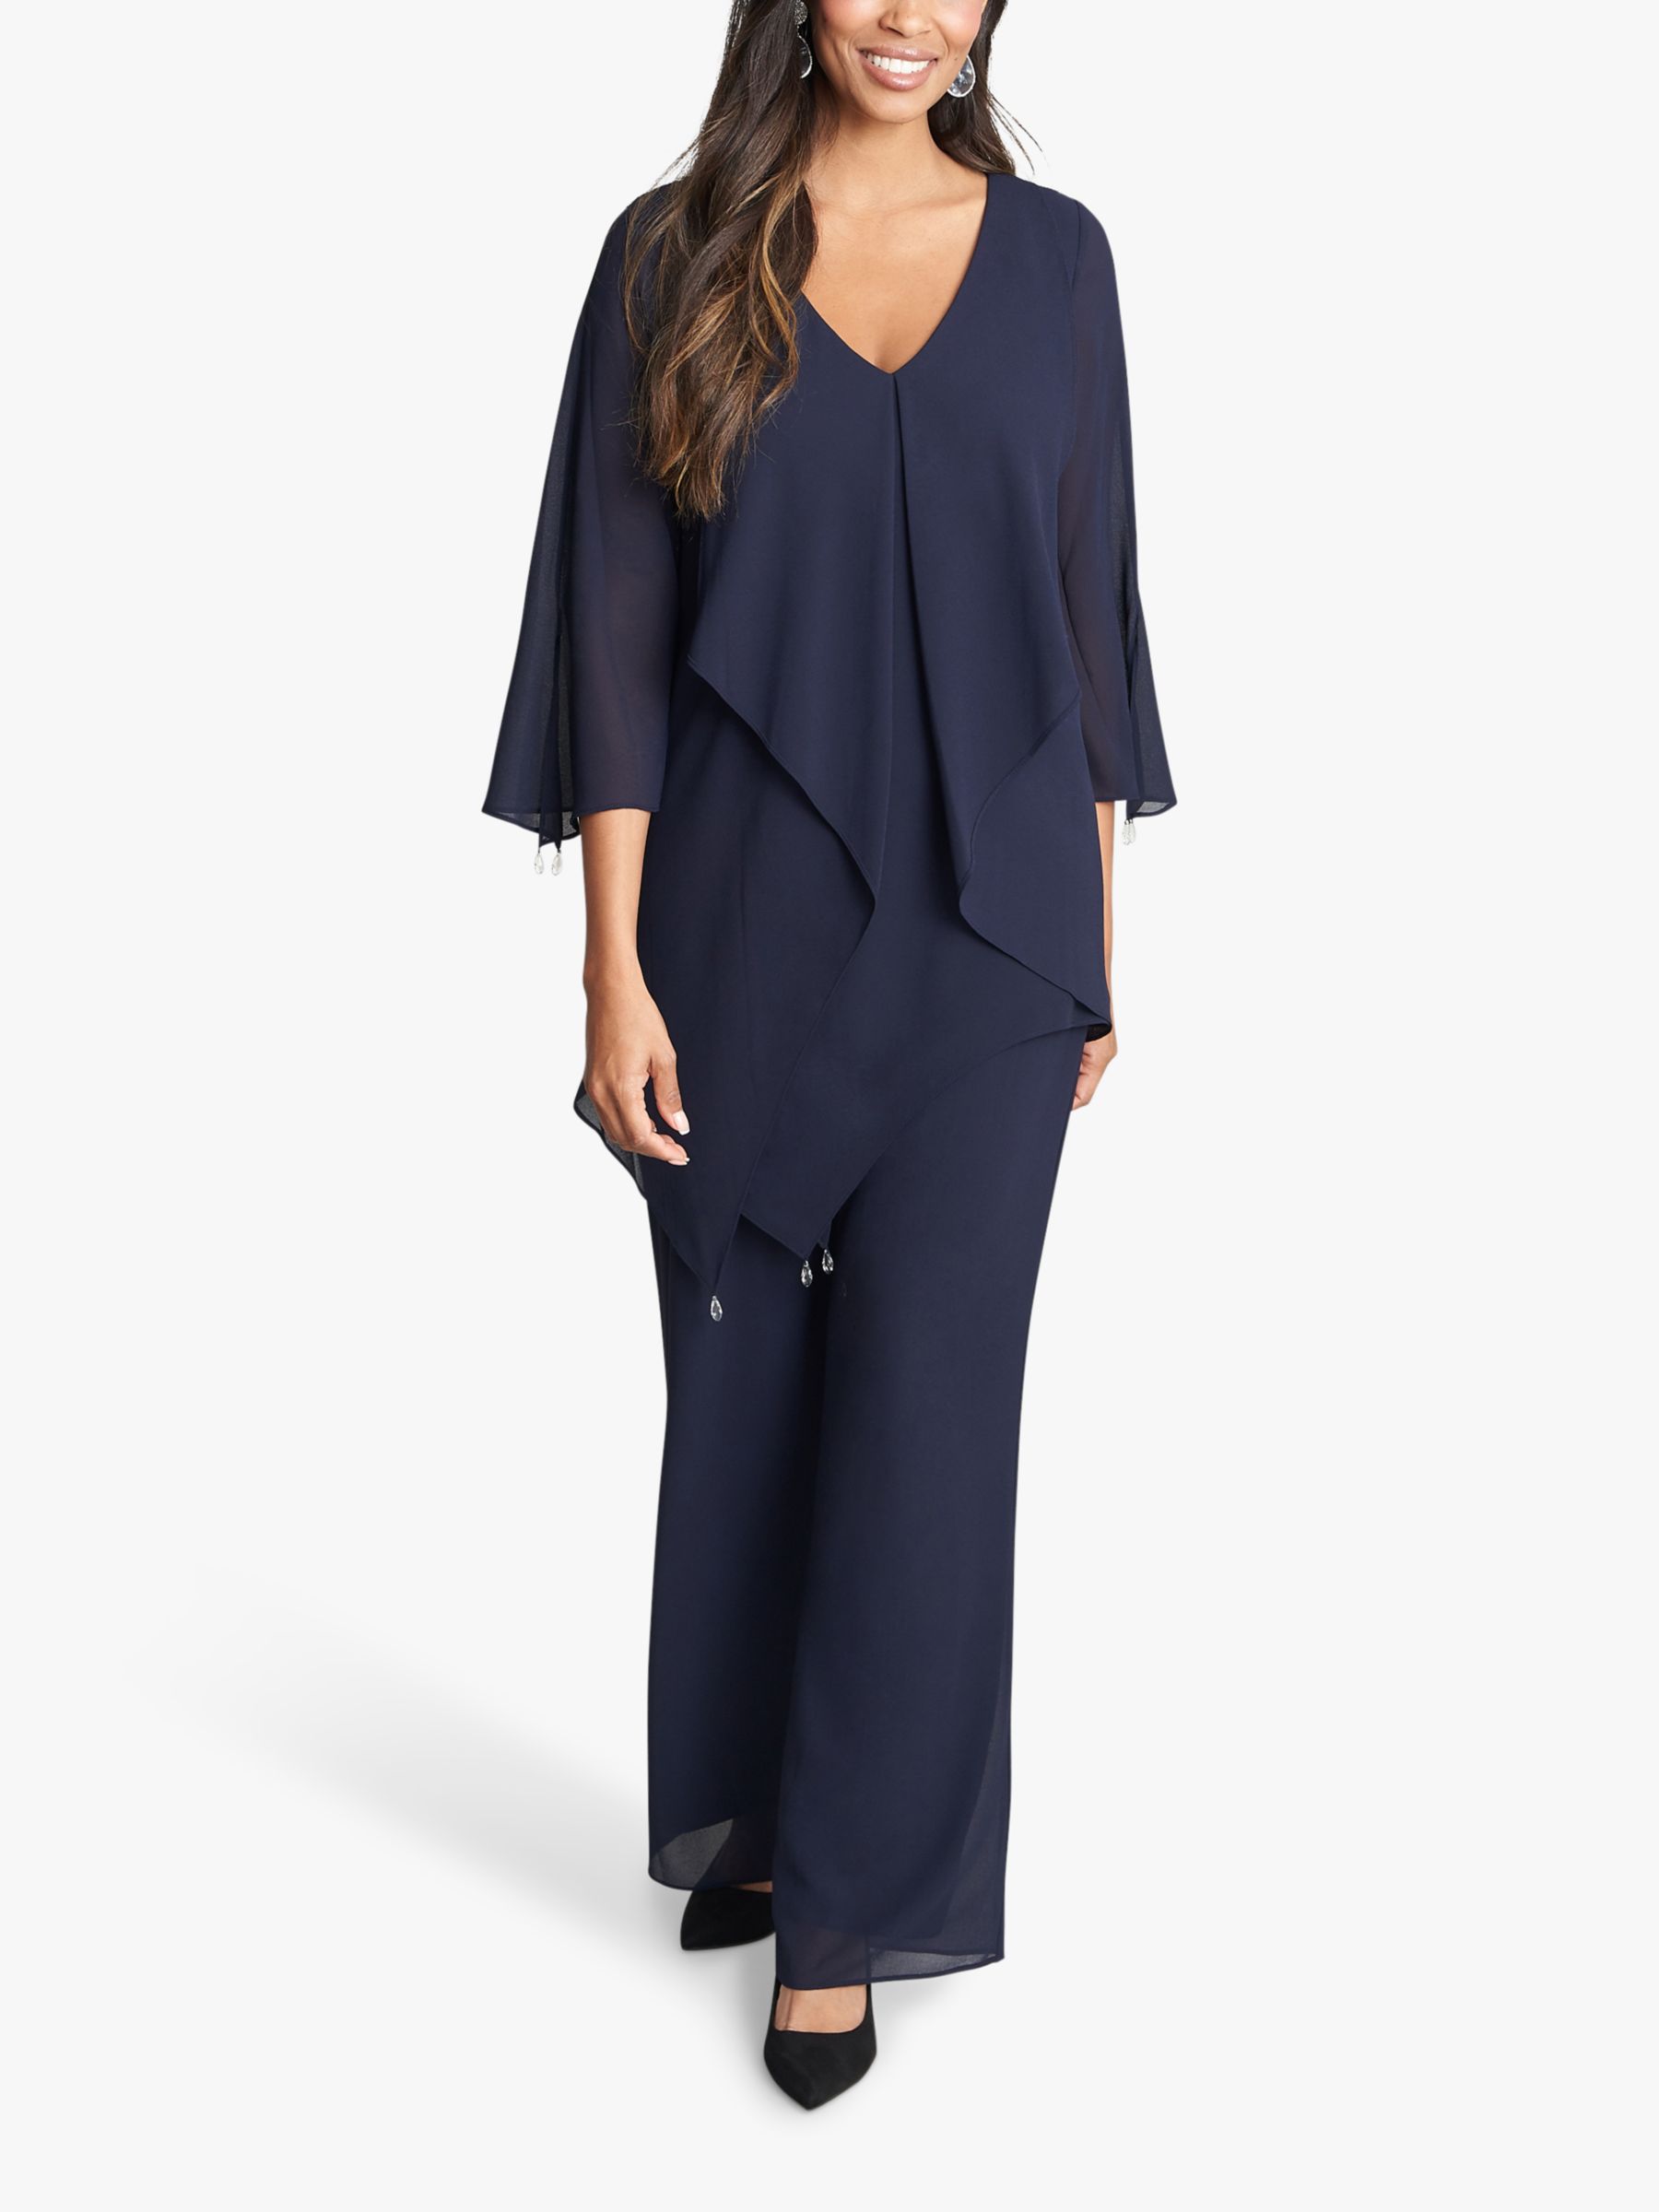 Gina Bacconi Wilma 2-Piece Suit With Asymmetric Cascade Ruffle Blouse & Wide Leg Trousers, Navy